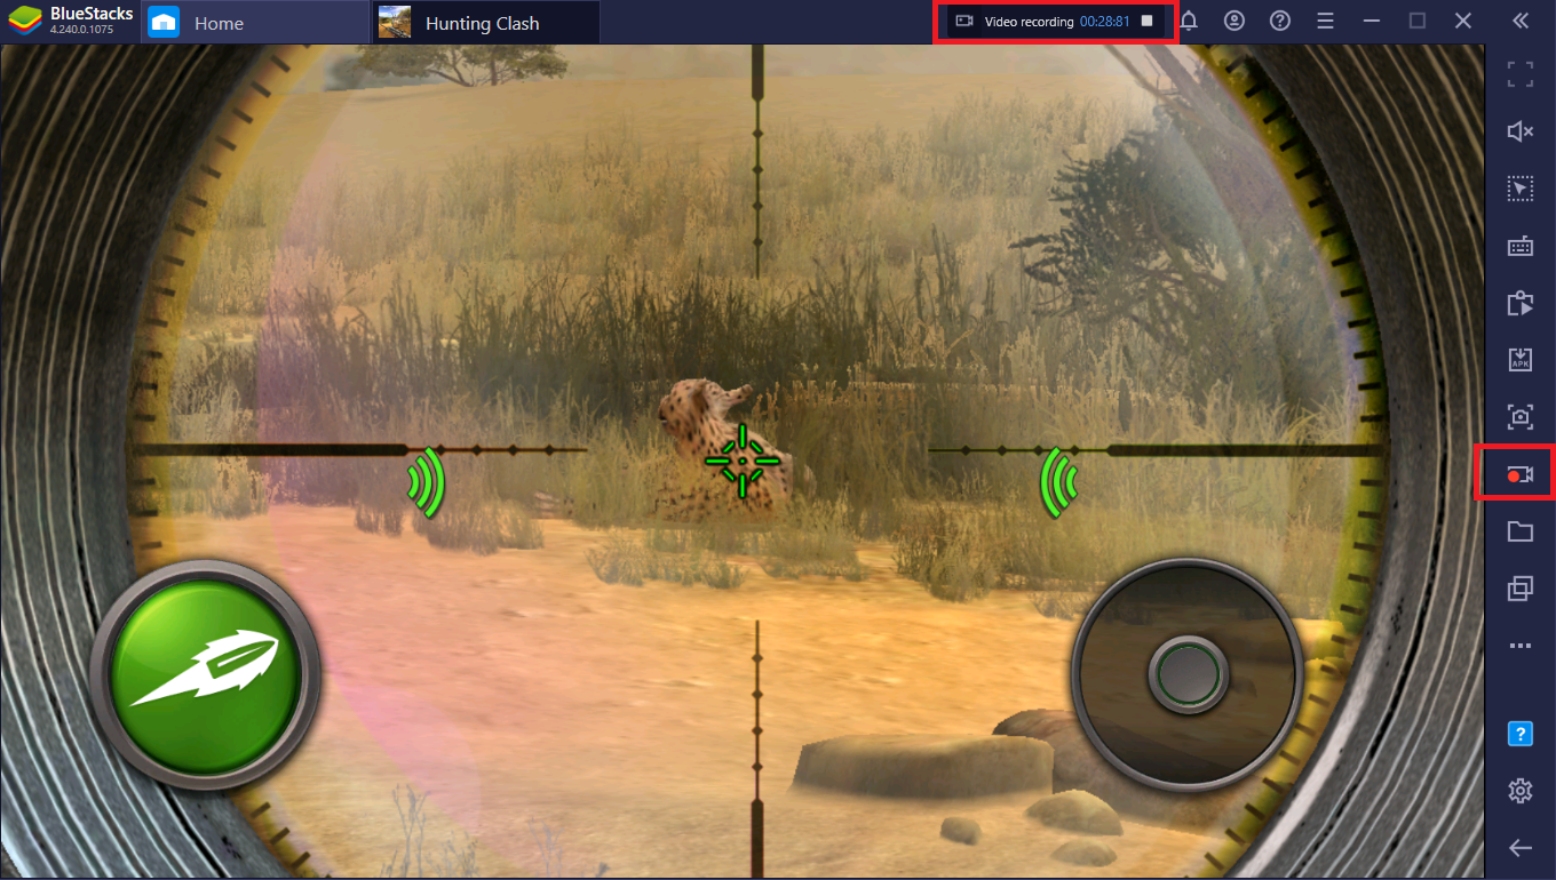 How to Play Hunting Clash On PC With BlueStacks